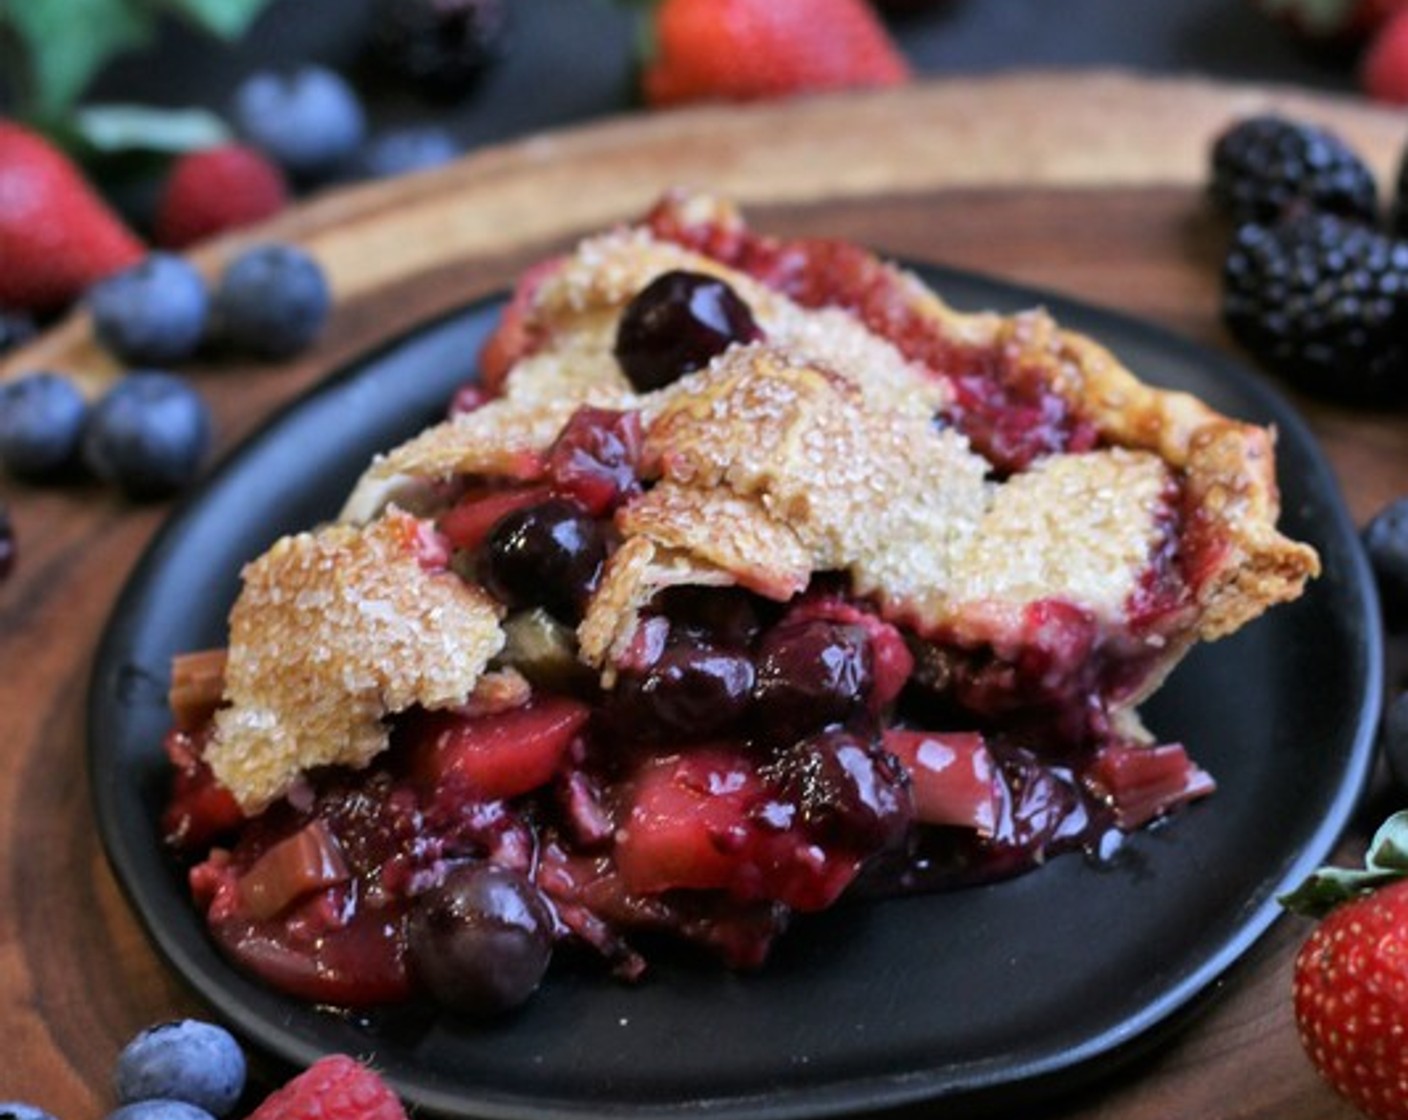 step 19 Allow the pie to cool for at least 4 hours before serving. This fruit pie is best served within a day, but it can be covered tightly and stored in the refrigerator.